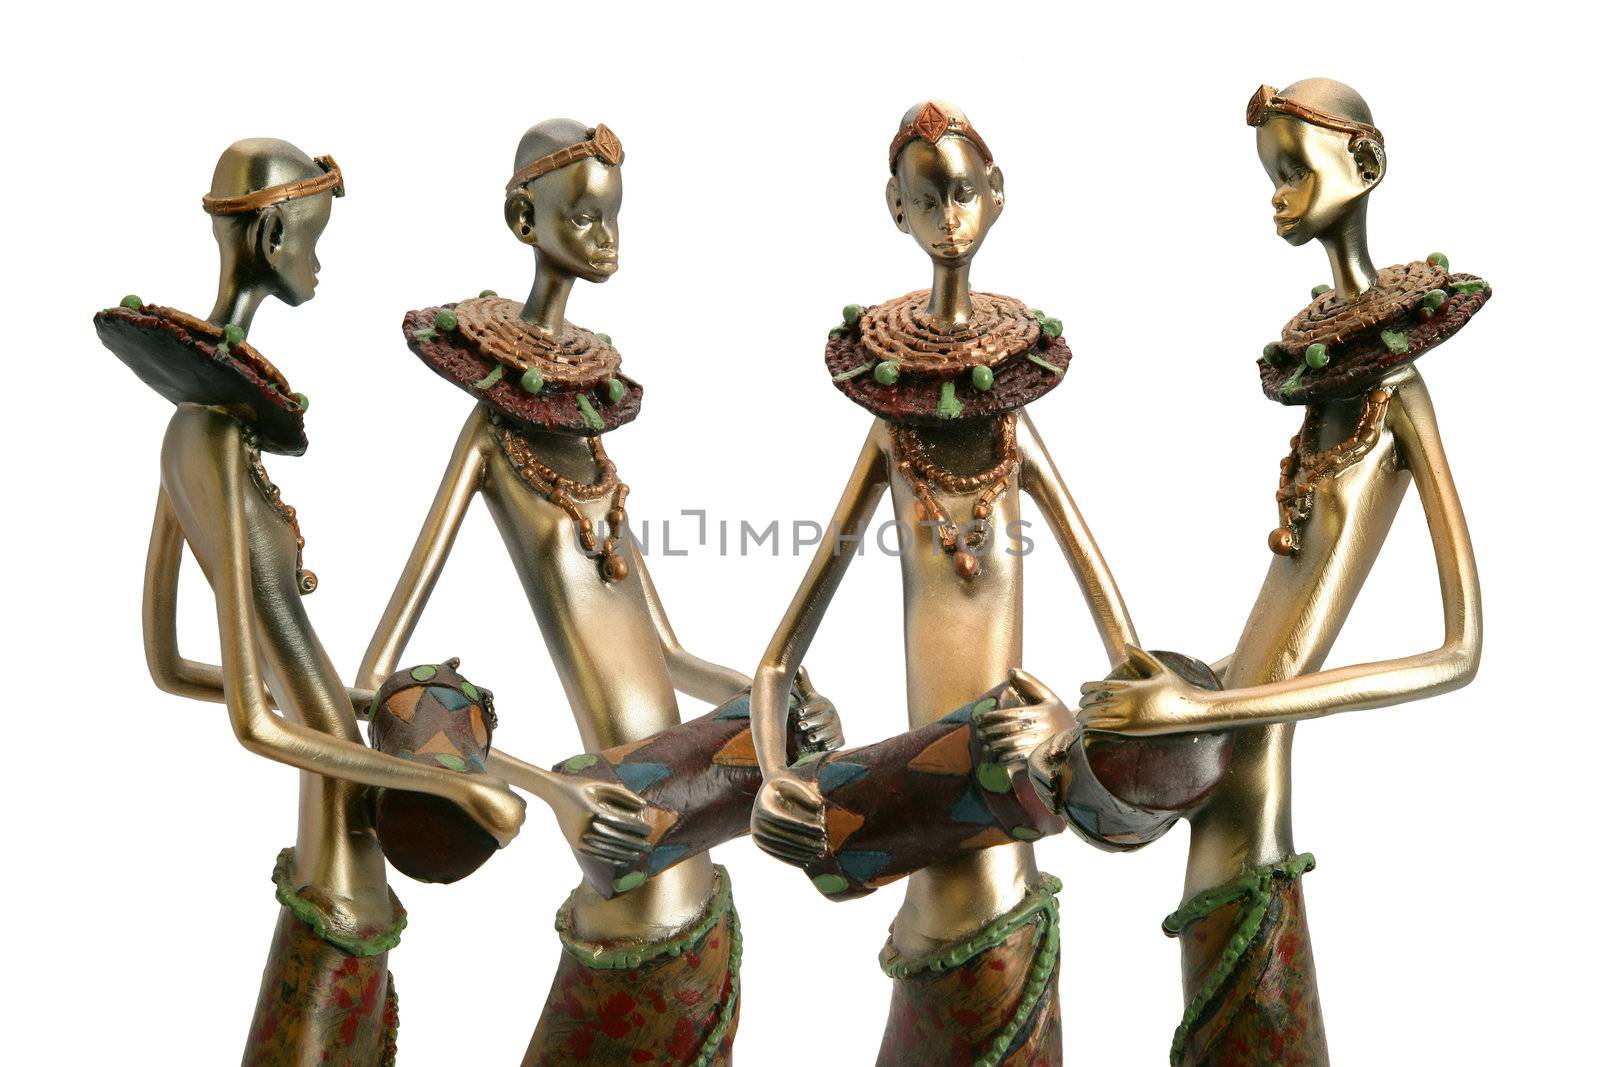 African figurines holding drums